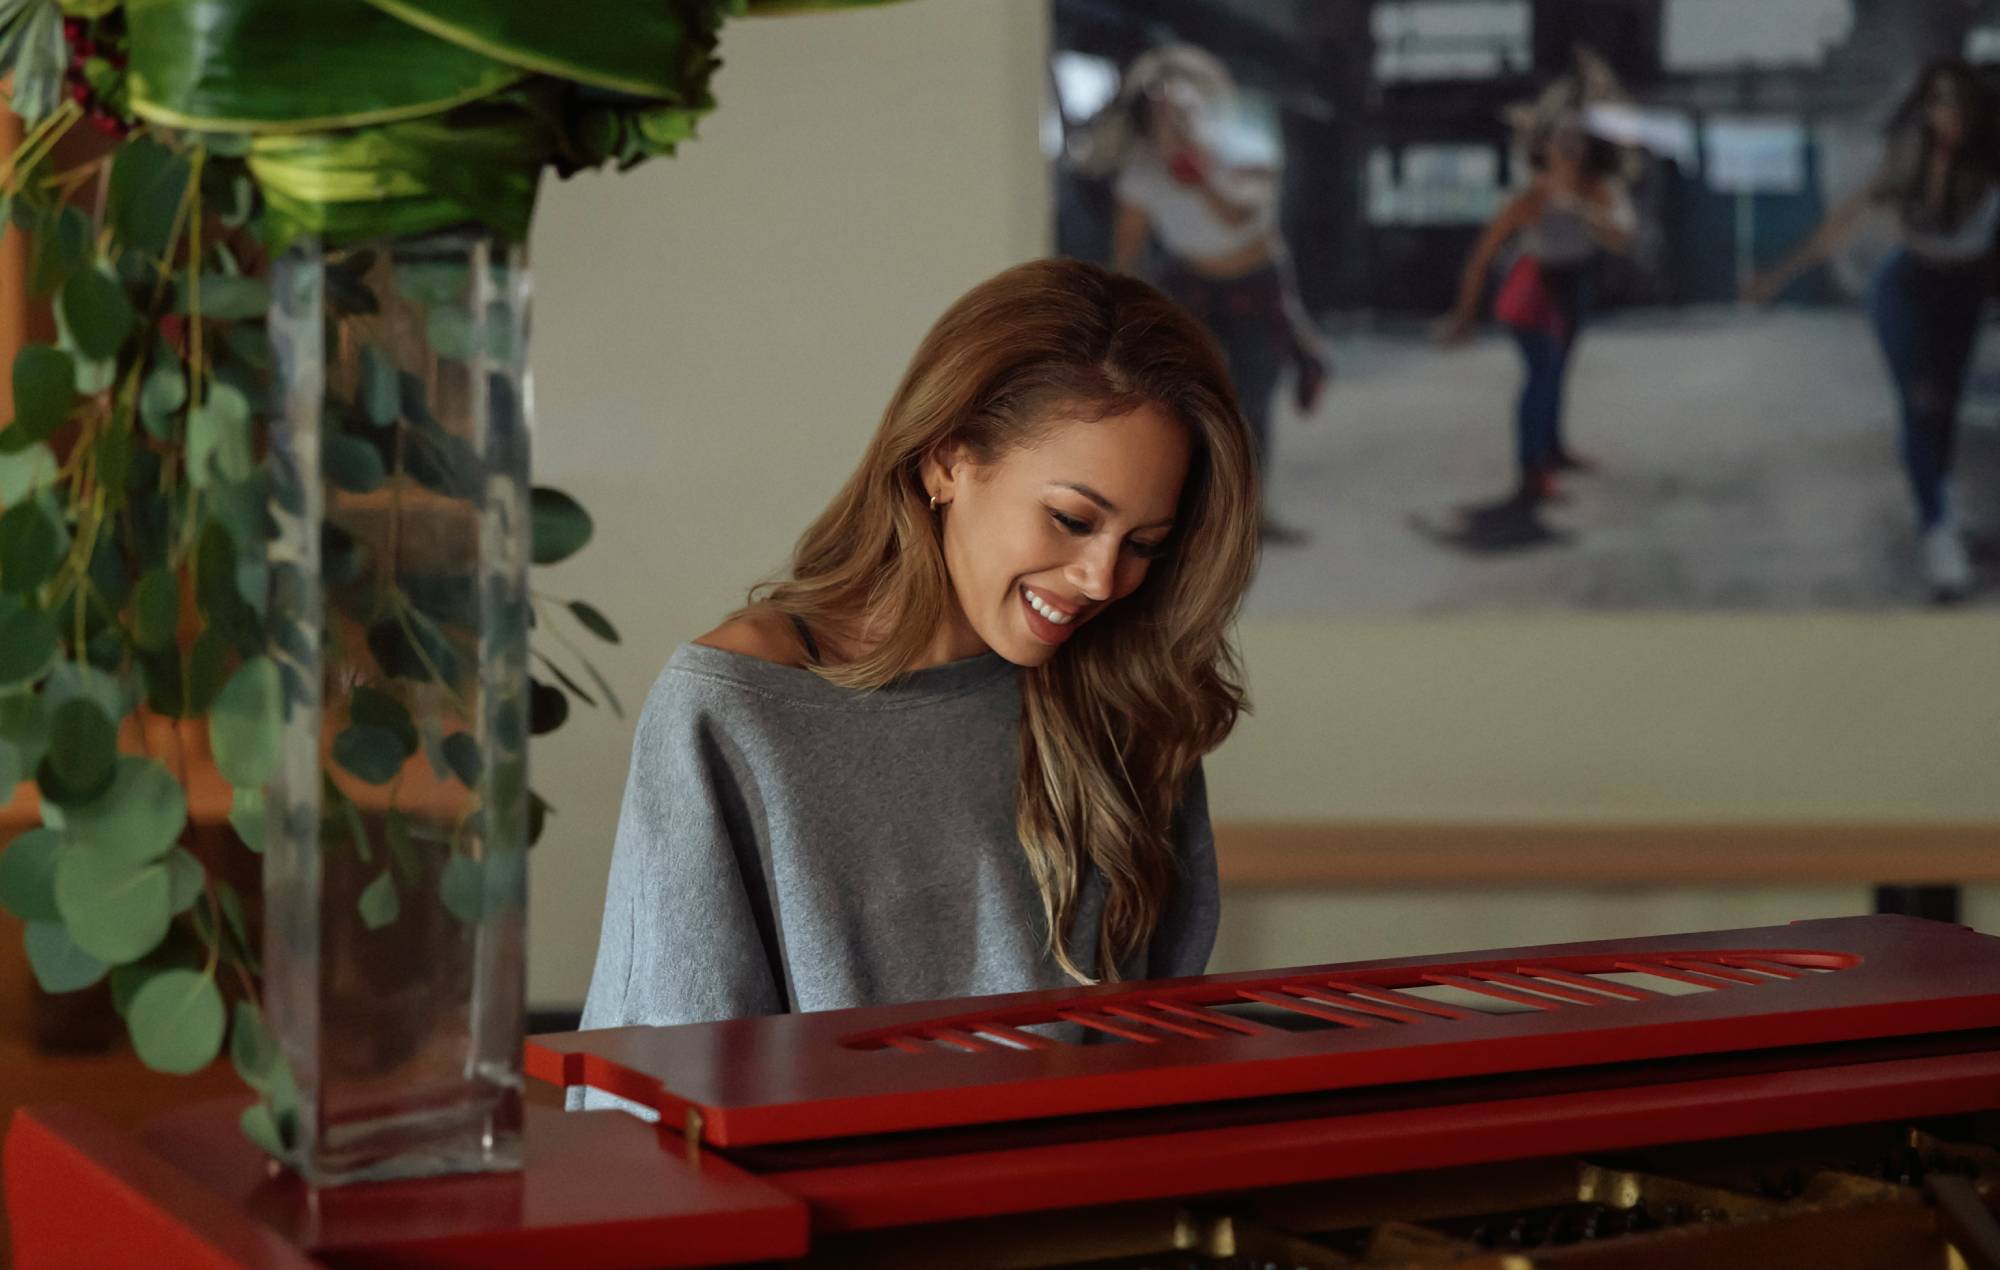 Jade Ewen on playing Mariah Carey: “It almost felt a bit weird and too close to home”